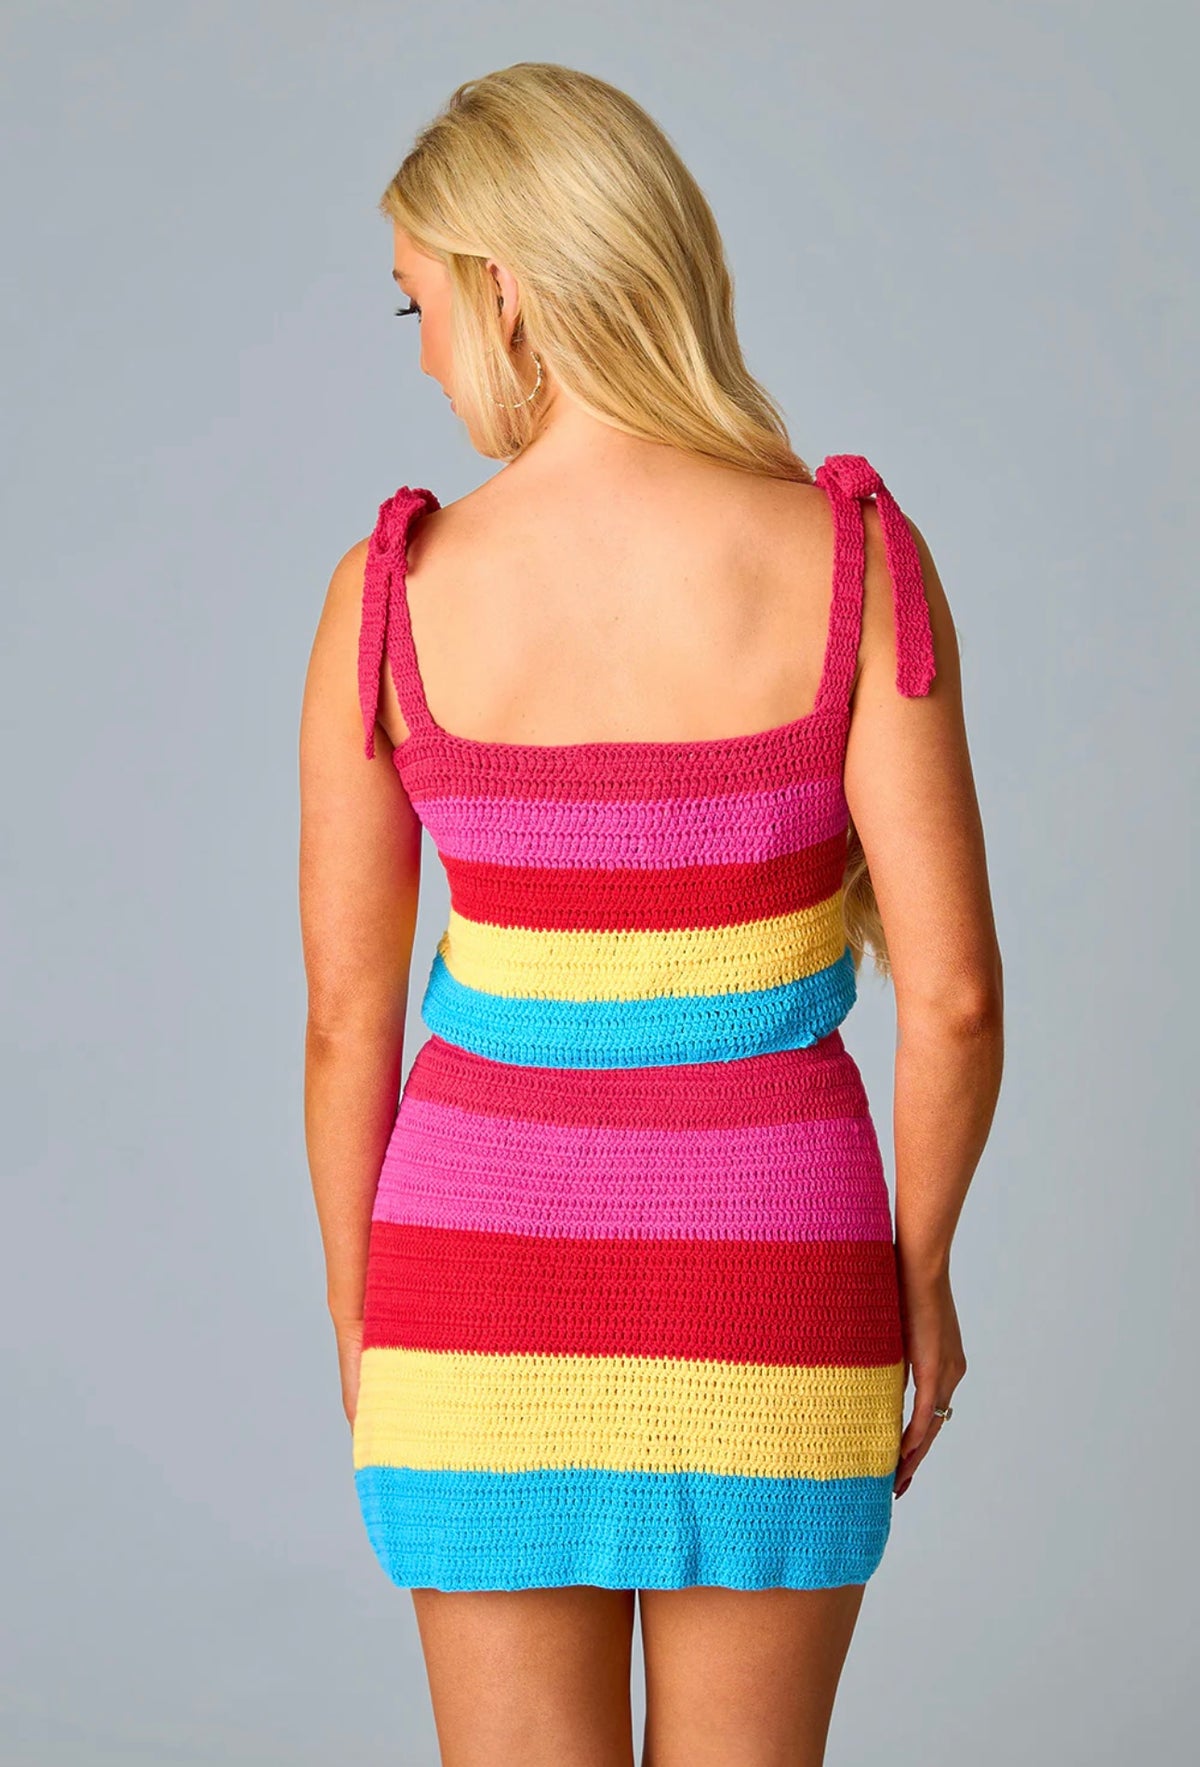 FAR OUT CROCHET TWO-PIECE SET - OVER THE RAINBOW